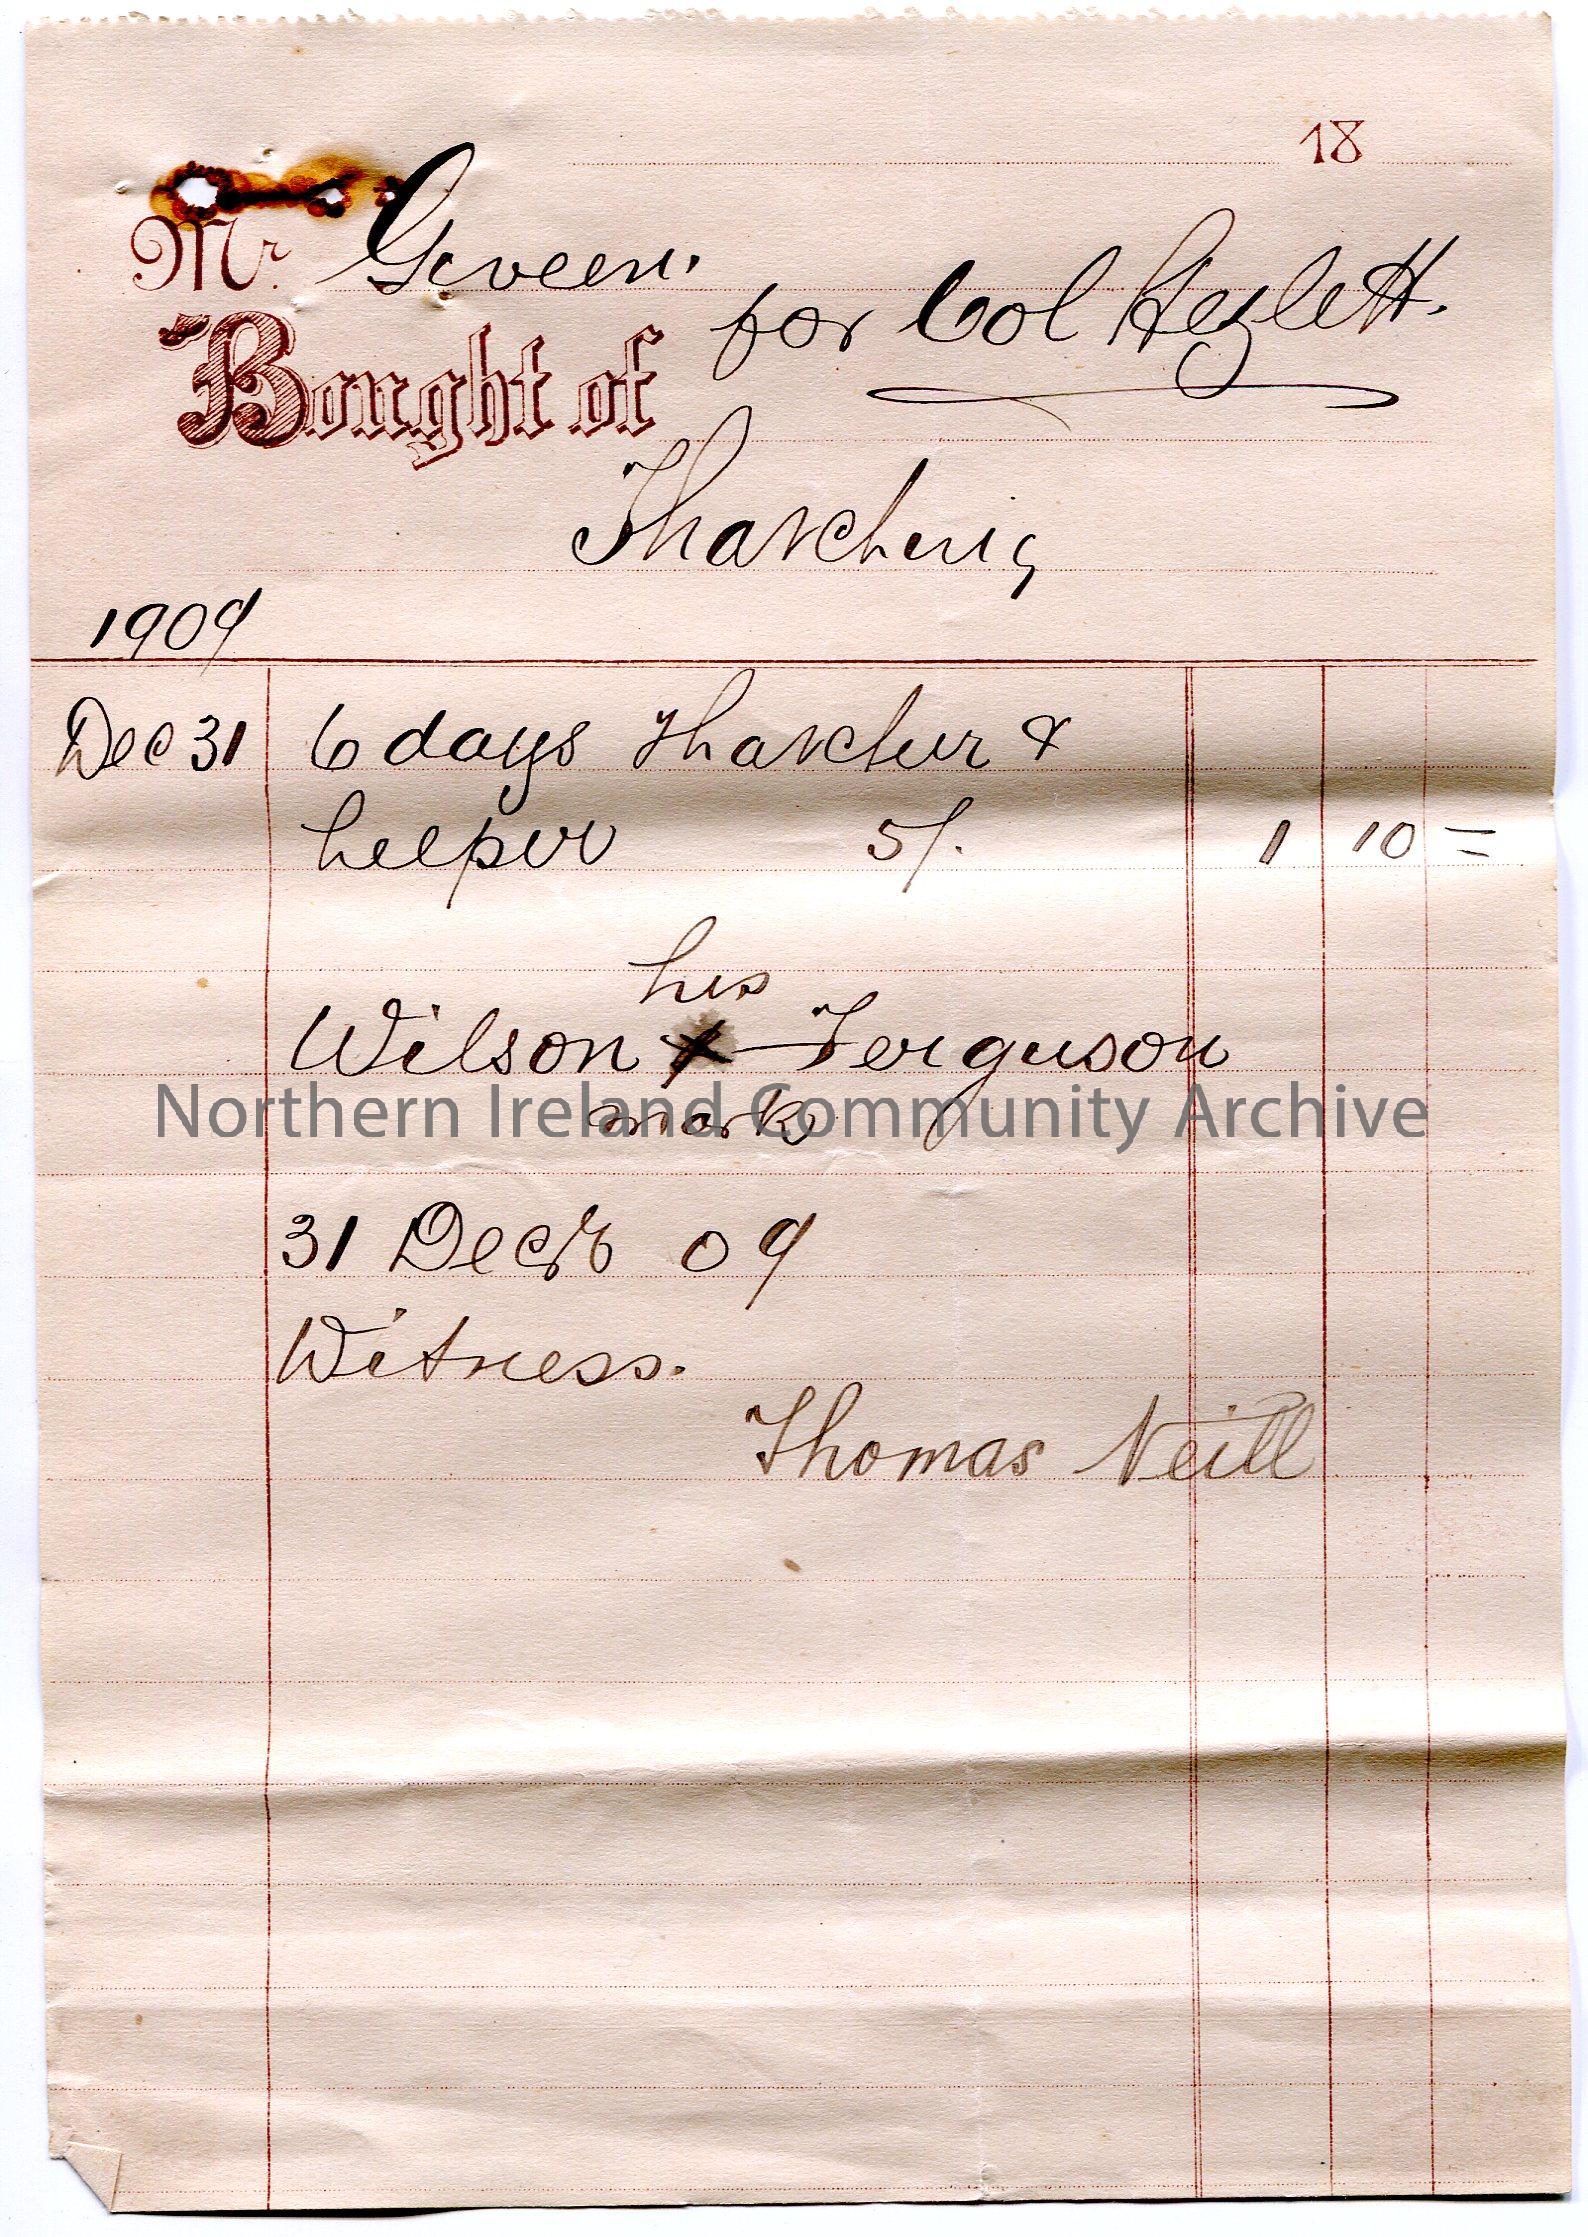 Handwritten receipt for payment of £1.10.0 from Mr [Robert] Giveen on behalf of Col Hezlett [Hezlet]. Payment to Wilson Ferguson for thatching wh…